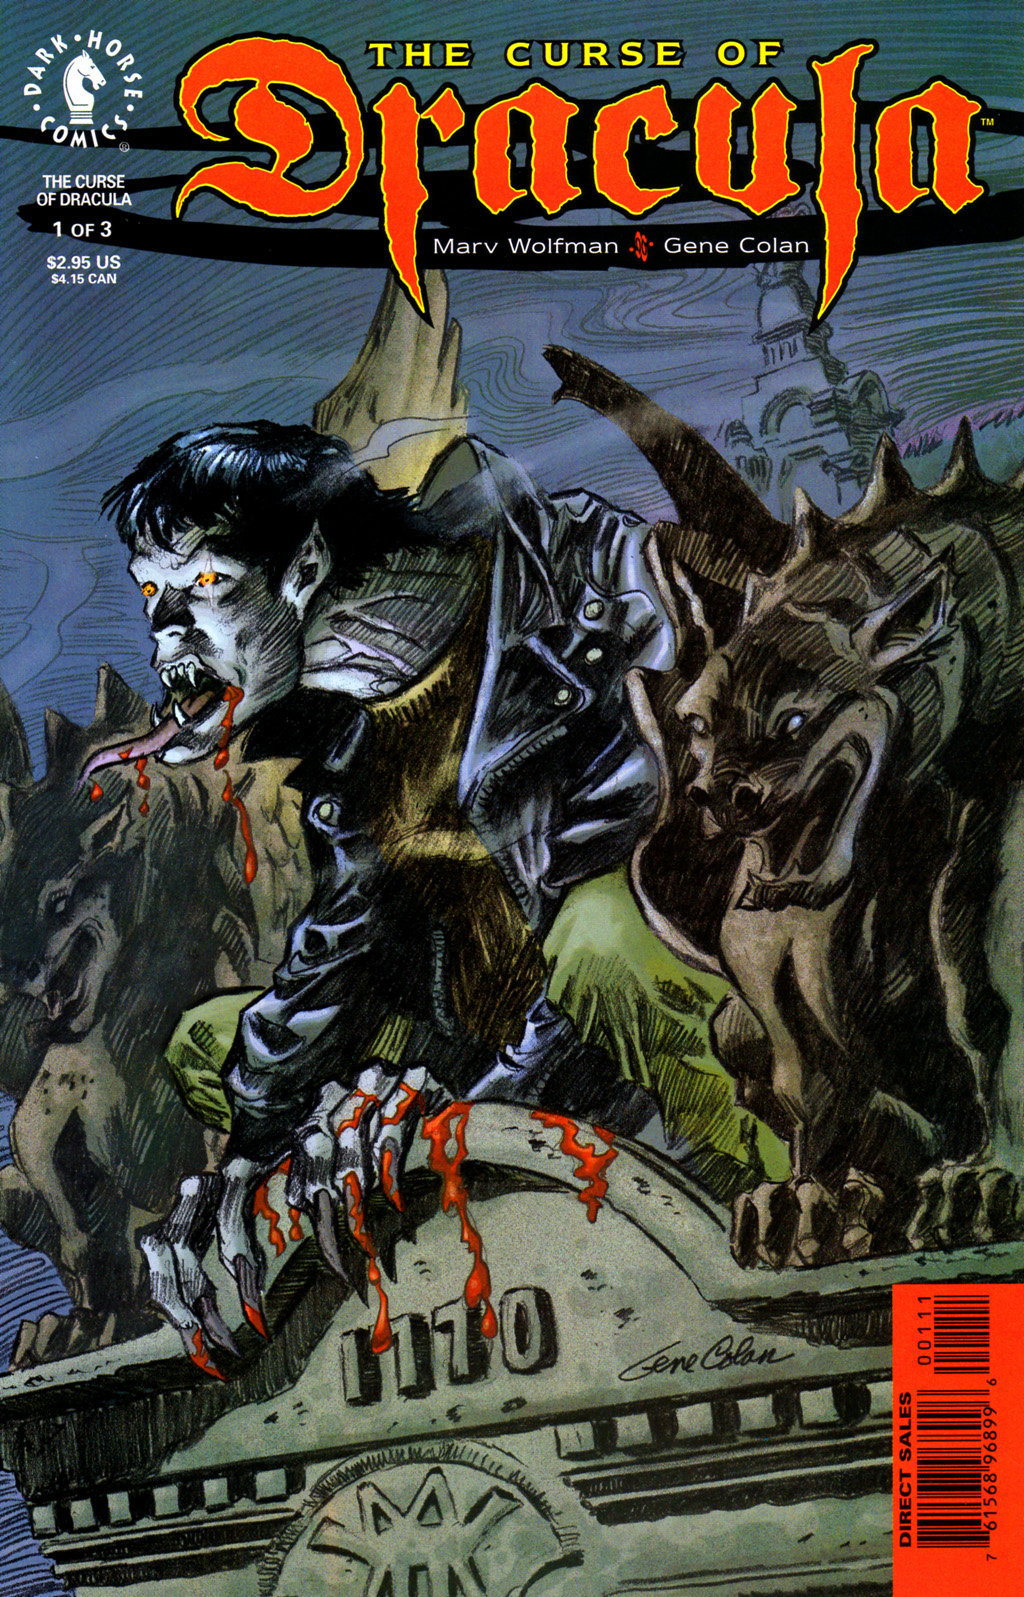 Read online The Curse of Dracula comic -  Issue #1 - 1